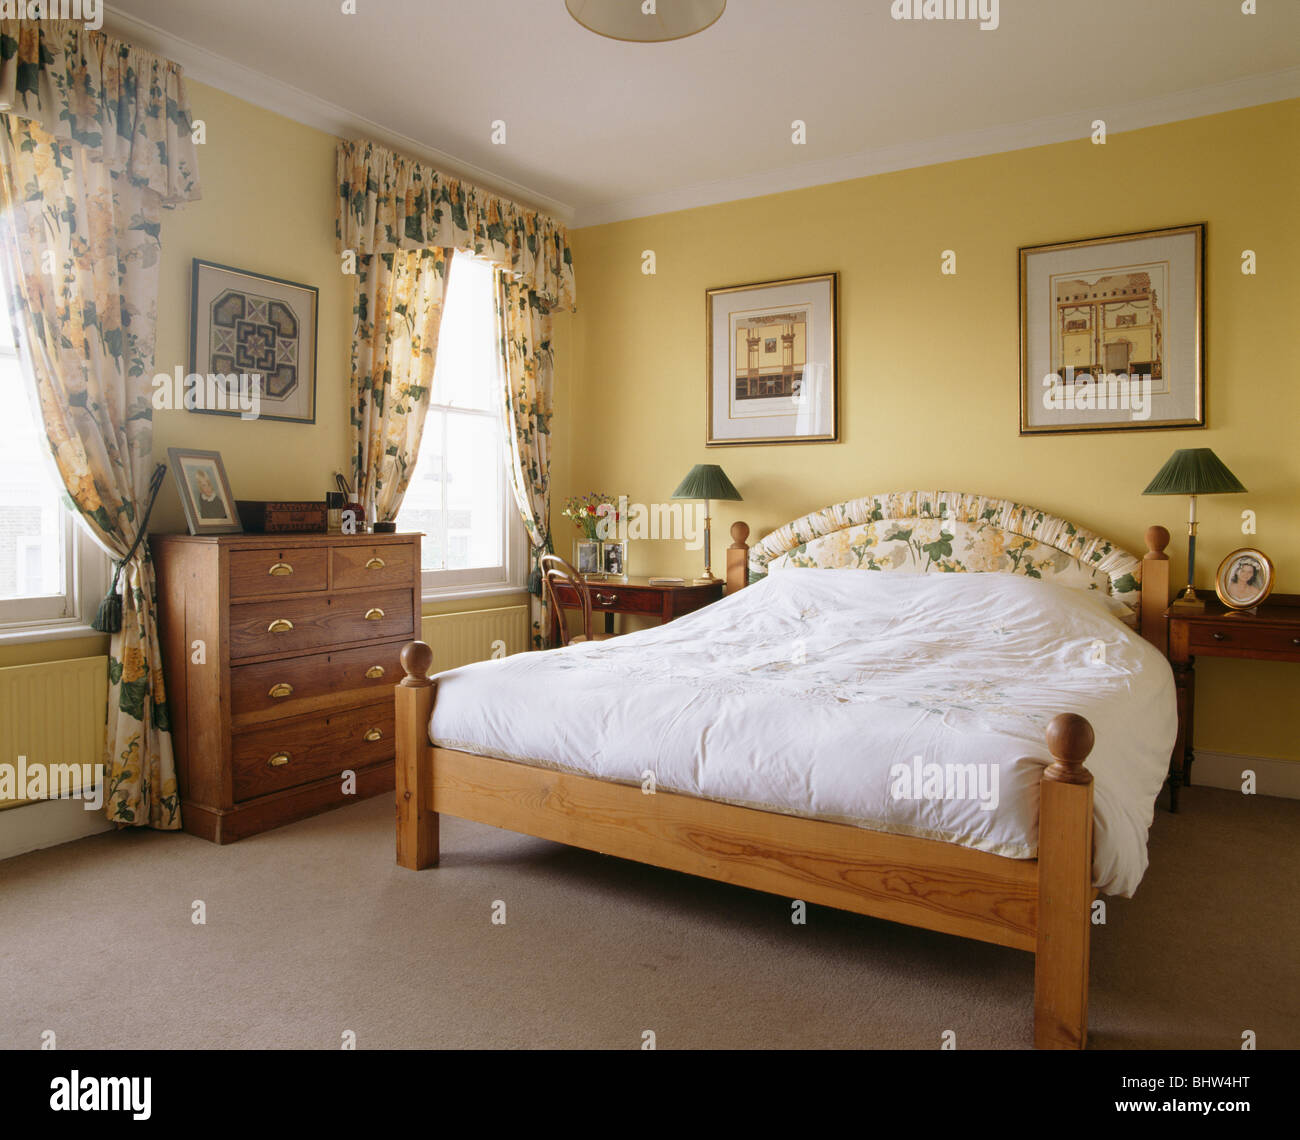 Pictures On Wall Above Pine Bed With White Bedlinen In